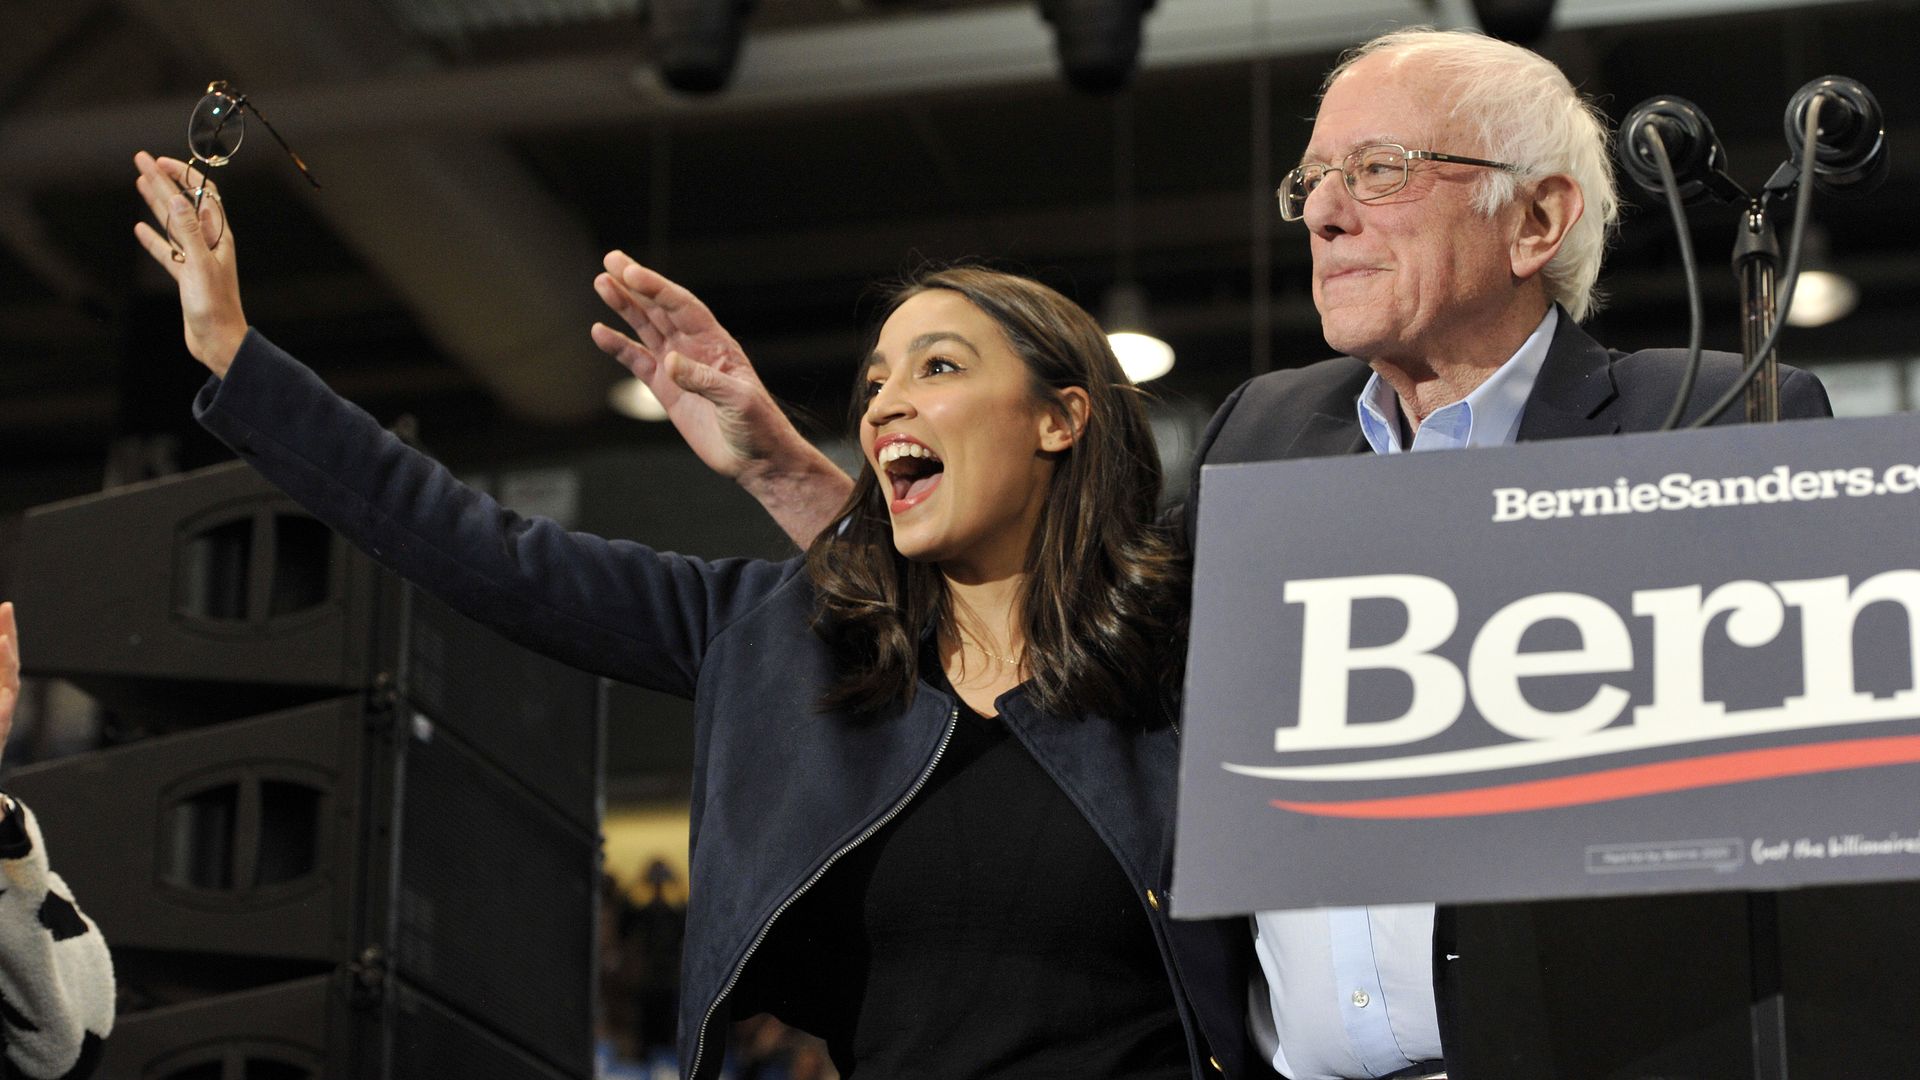 In this image, Bernie Sanders and AOC stand in front of a crowd with a Bernie 2020 sign in front of them attached to a podium.